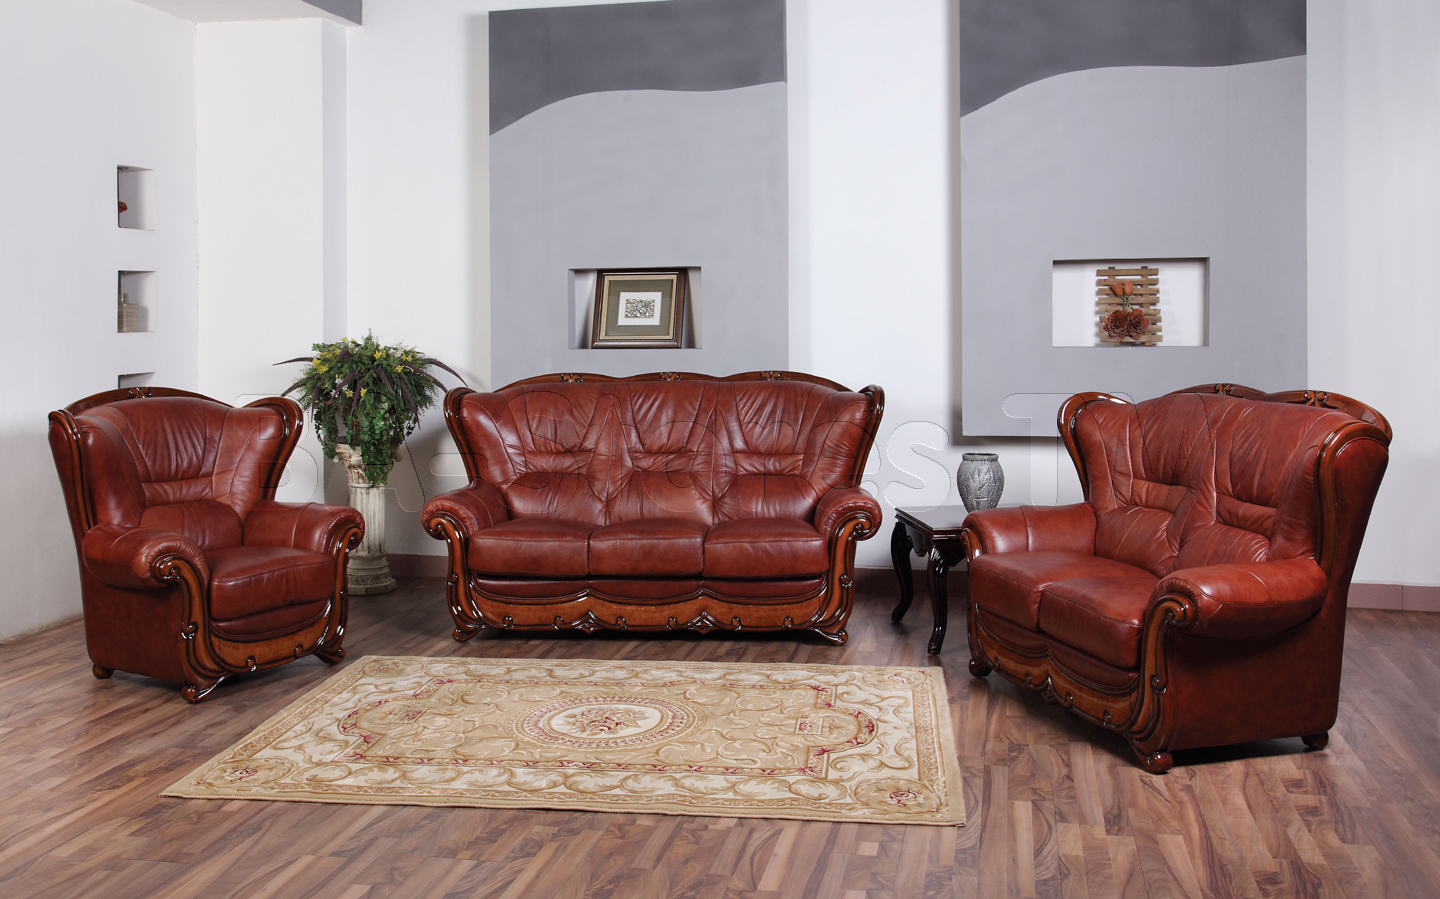 How To Furnish Your Living Room Sofa Set Designs For Small  - Sofa Set Design For Living Room In India